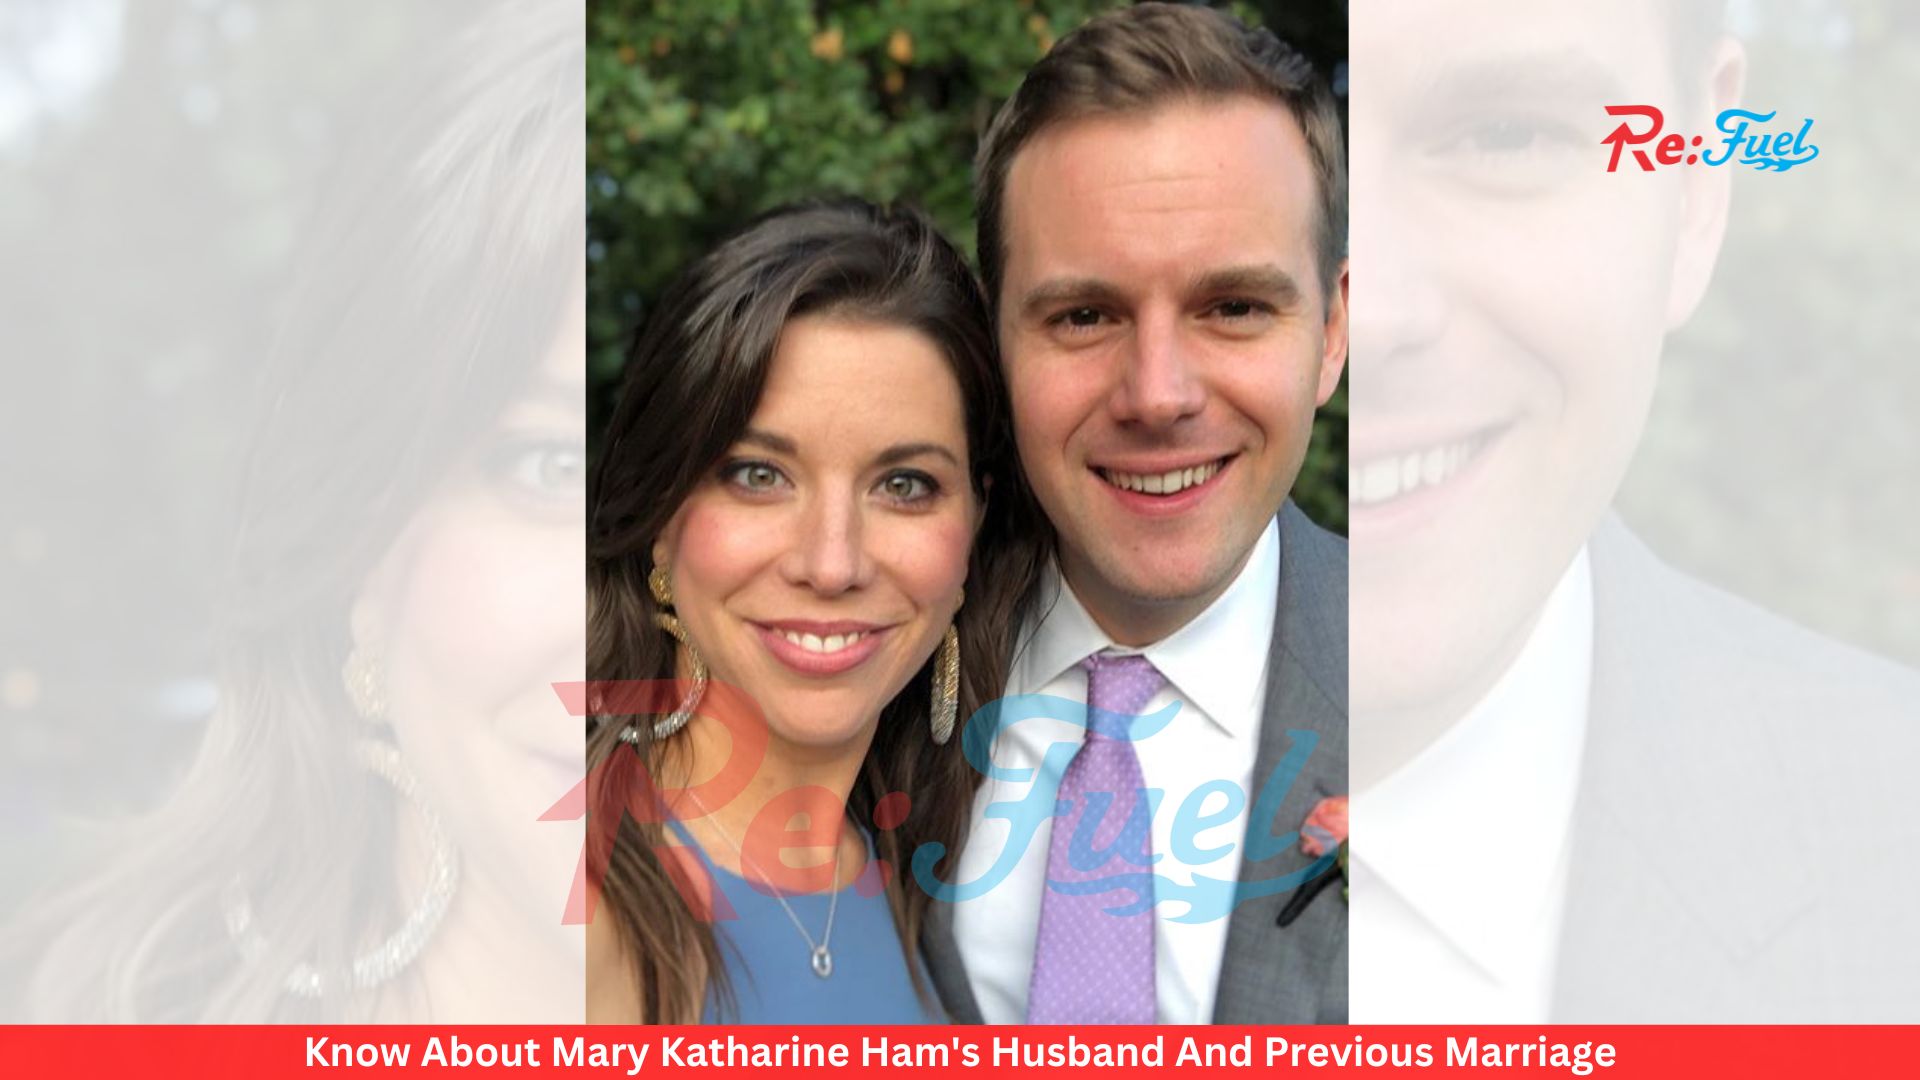 Know About Mary Katharine Ham's Husband And Previous Marriage